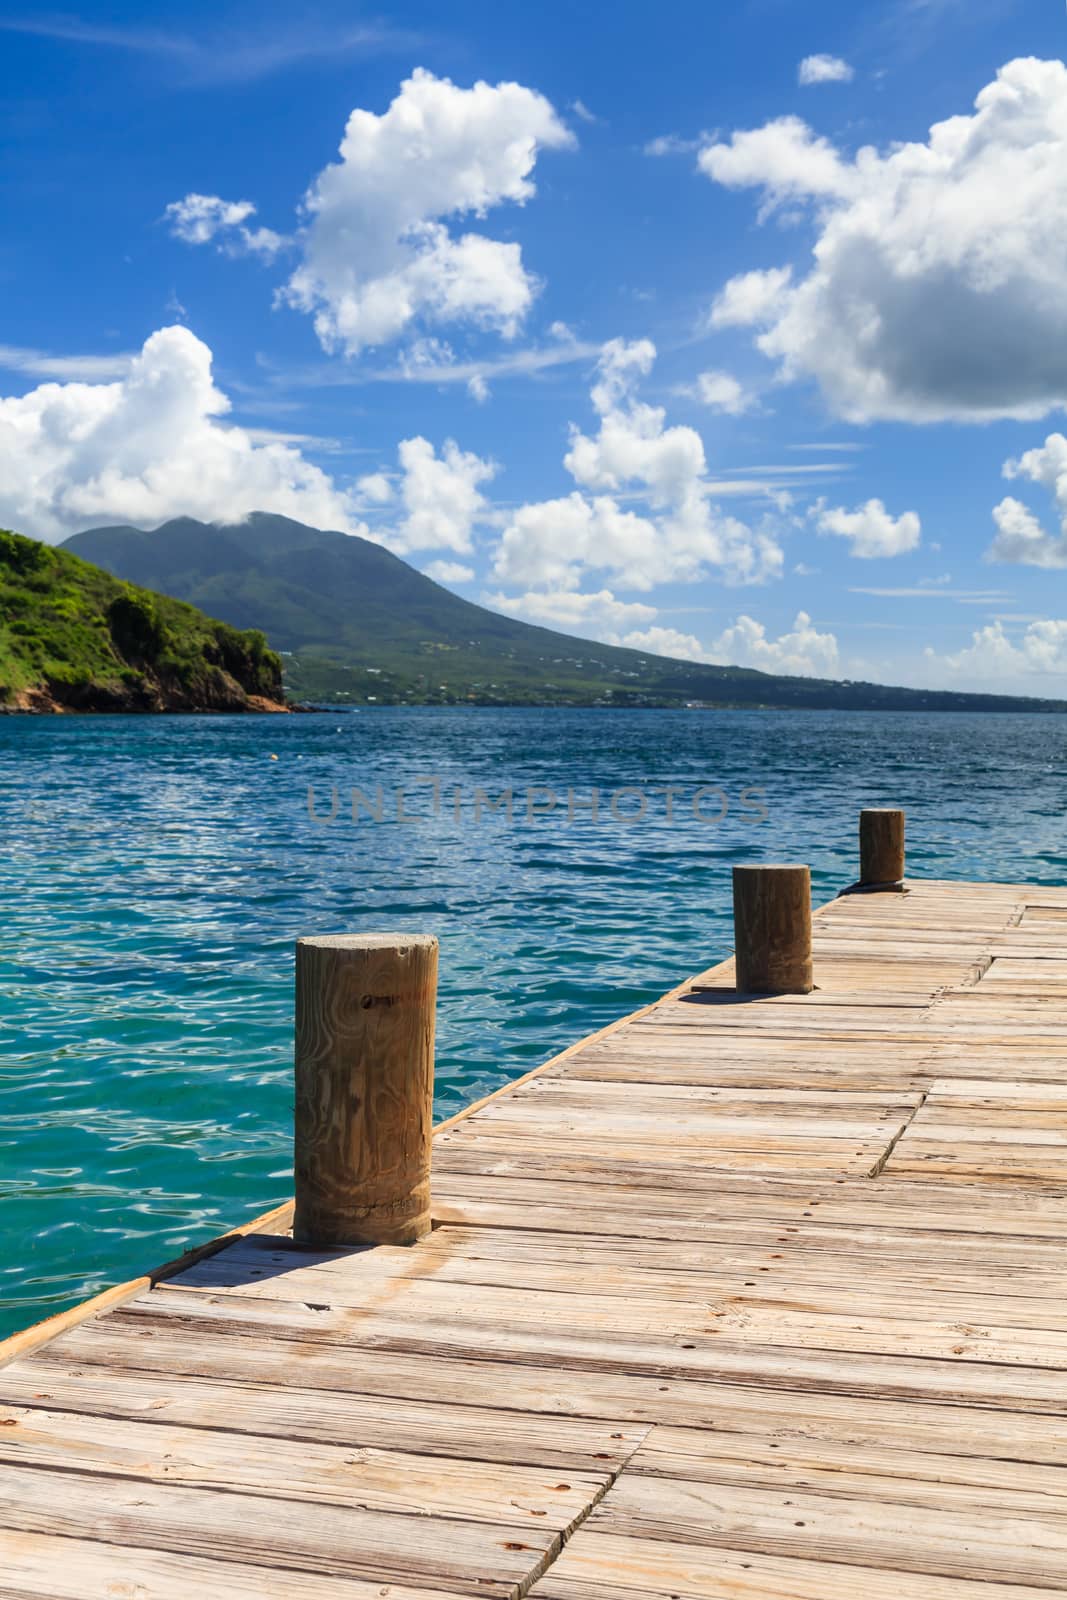 The pier is located on Cockleshell Bay on the Caribbean island of St. Kitts in the West Indies.  The island of Nevis can be seen in the background.